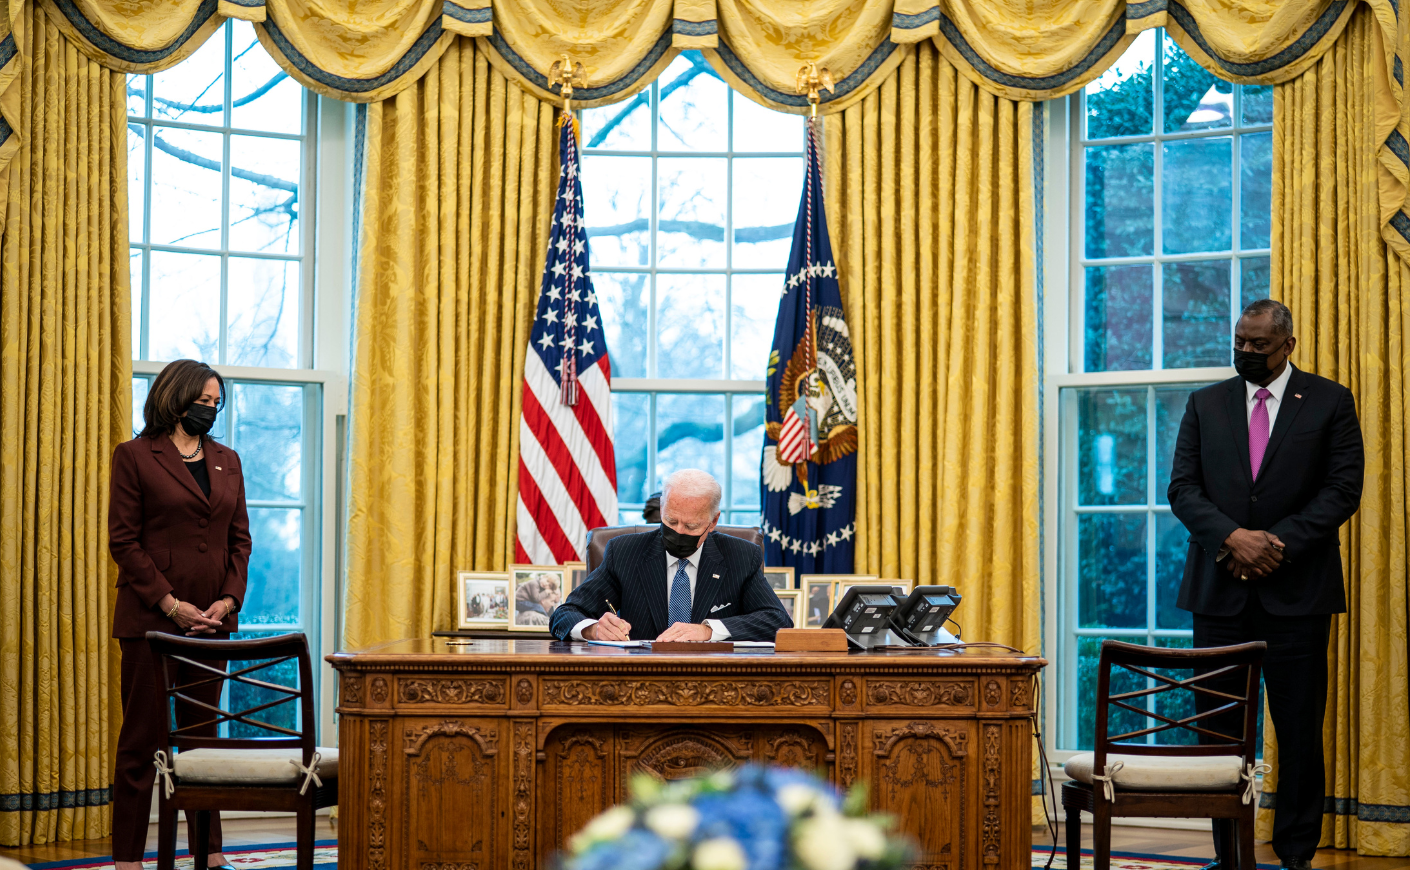 Flanked by Vice President Kamala Harris and Secretary of Defense Lloyd Austin, President Joe Biden signs an executive order repealing the ban on transgender people serving openly in the military on Jan. 25, 2021.